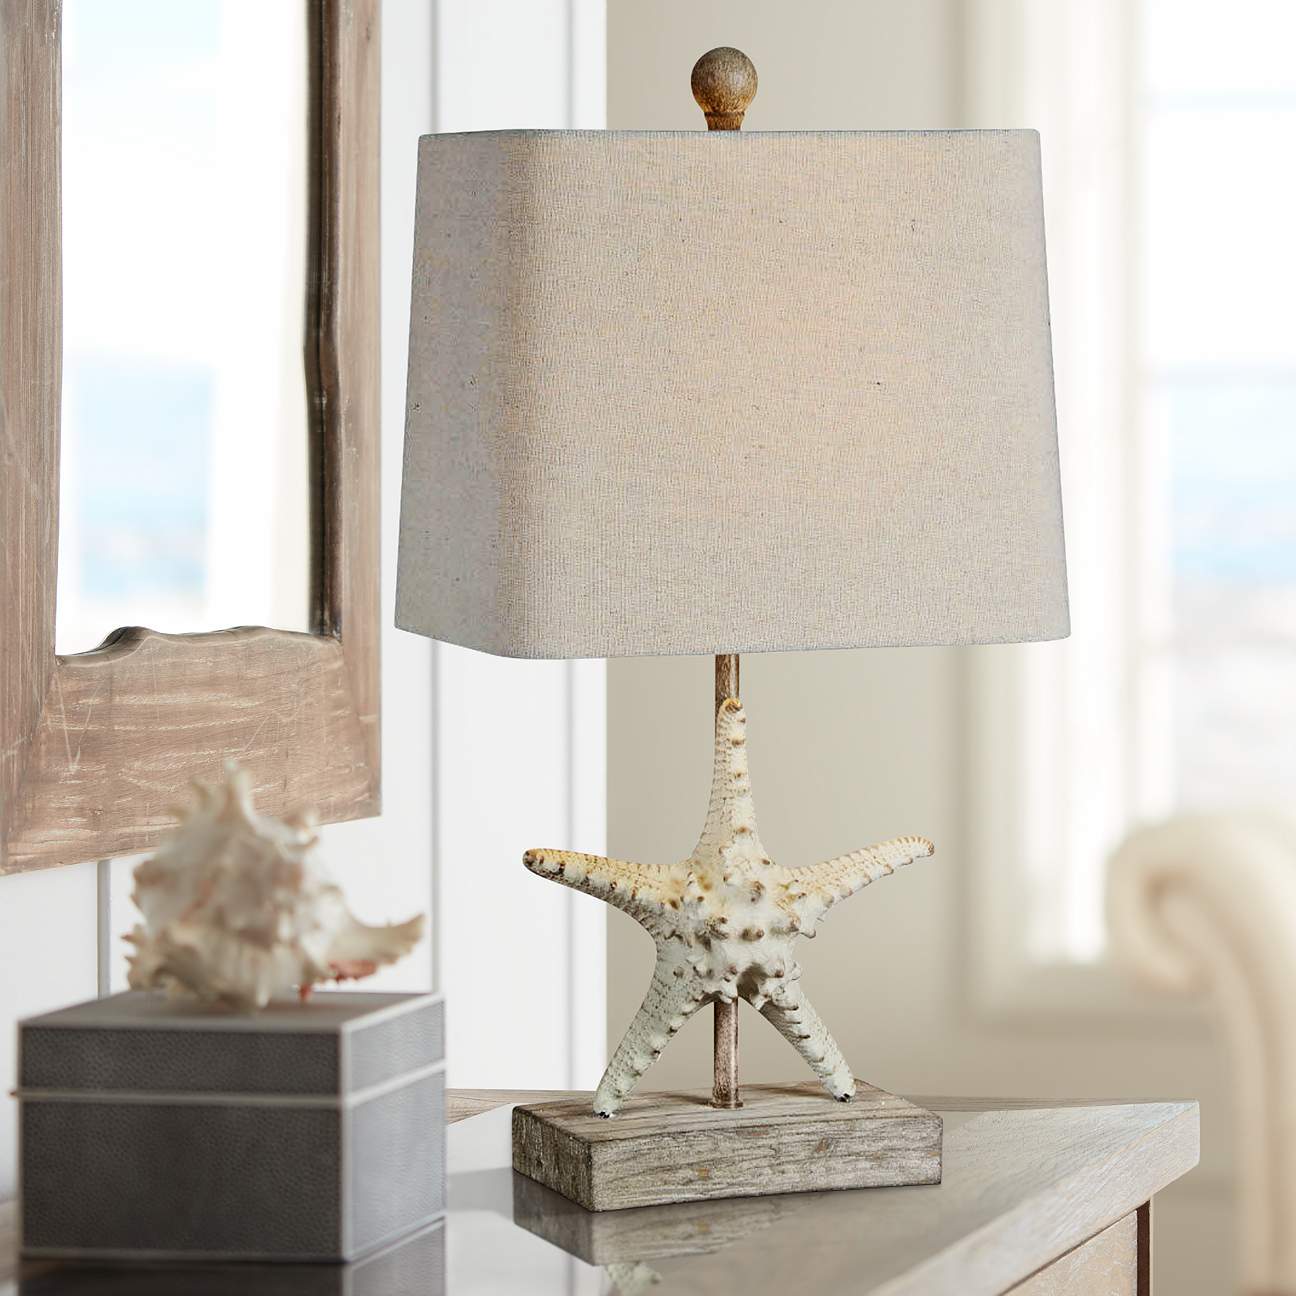 Darla 19 And One Half Inch High Coastal Style White Starfish Table Lamp  19n79cropped ?qlt=65&wid=1296&hei=1296&op Sharpen=1&fmt=jpeg